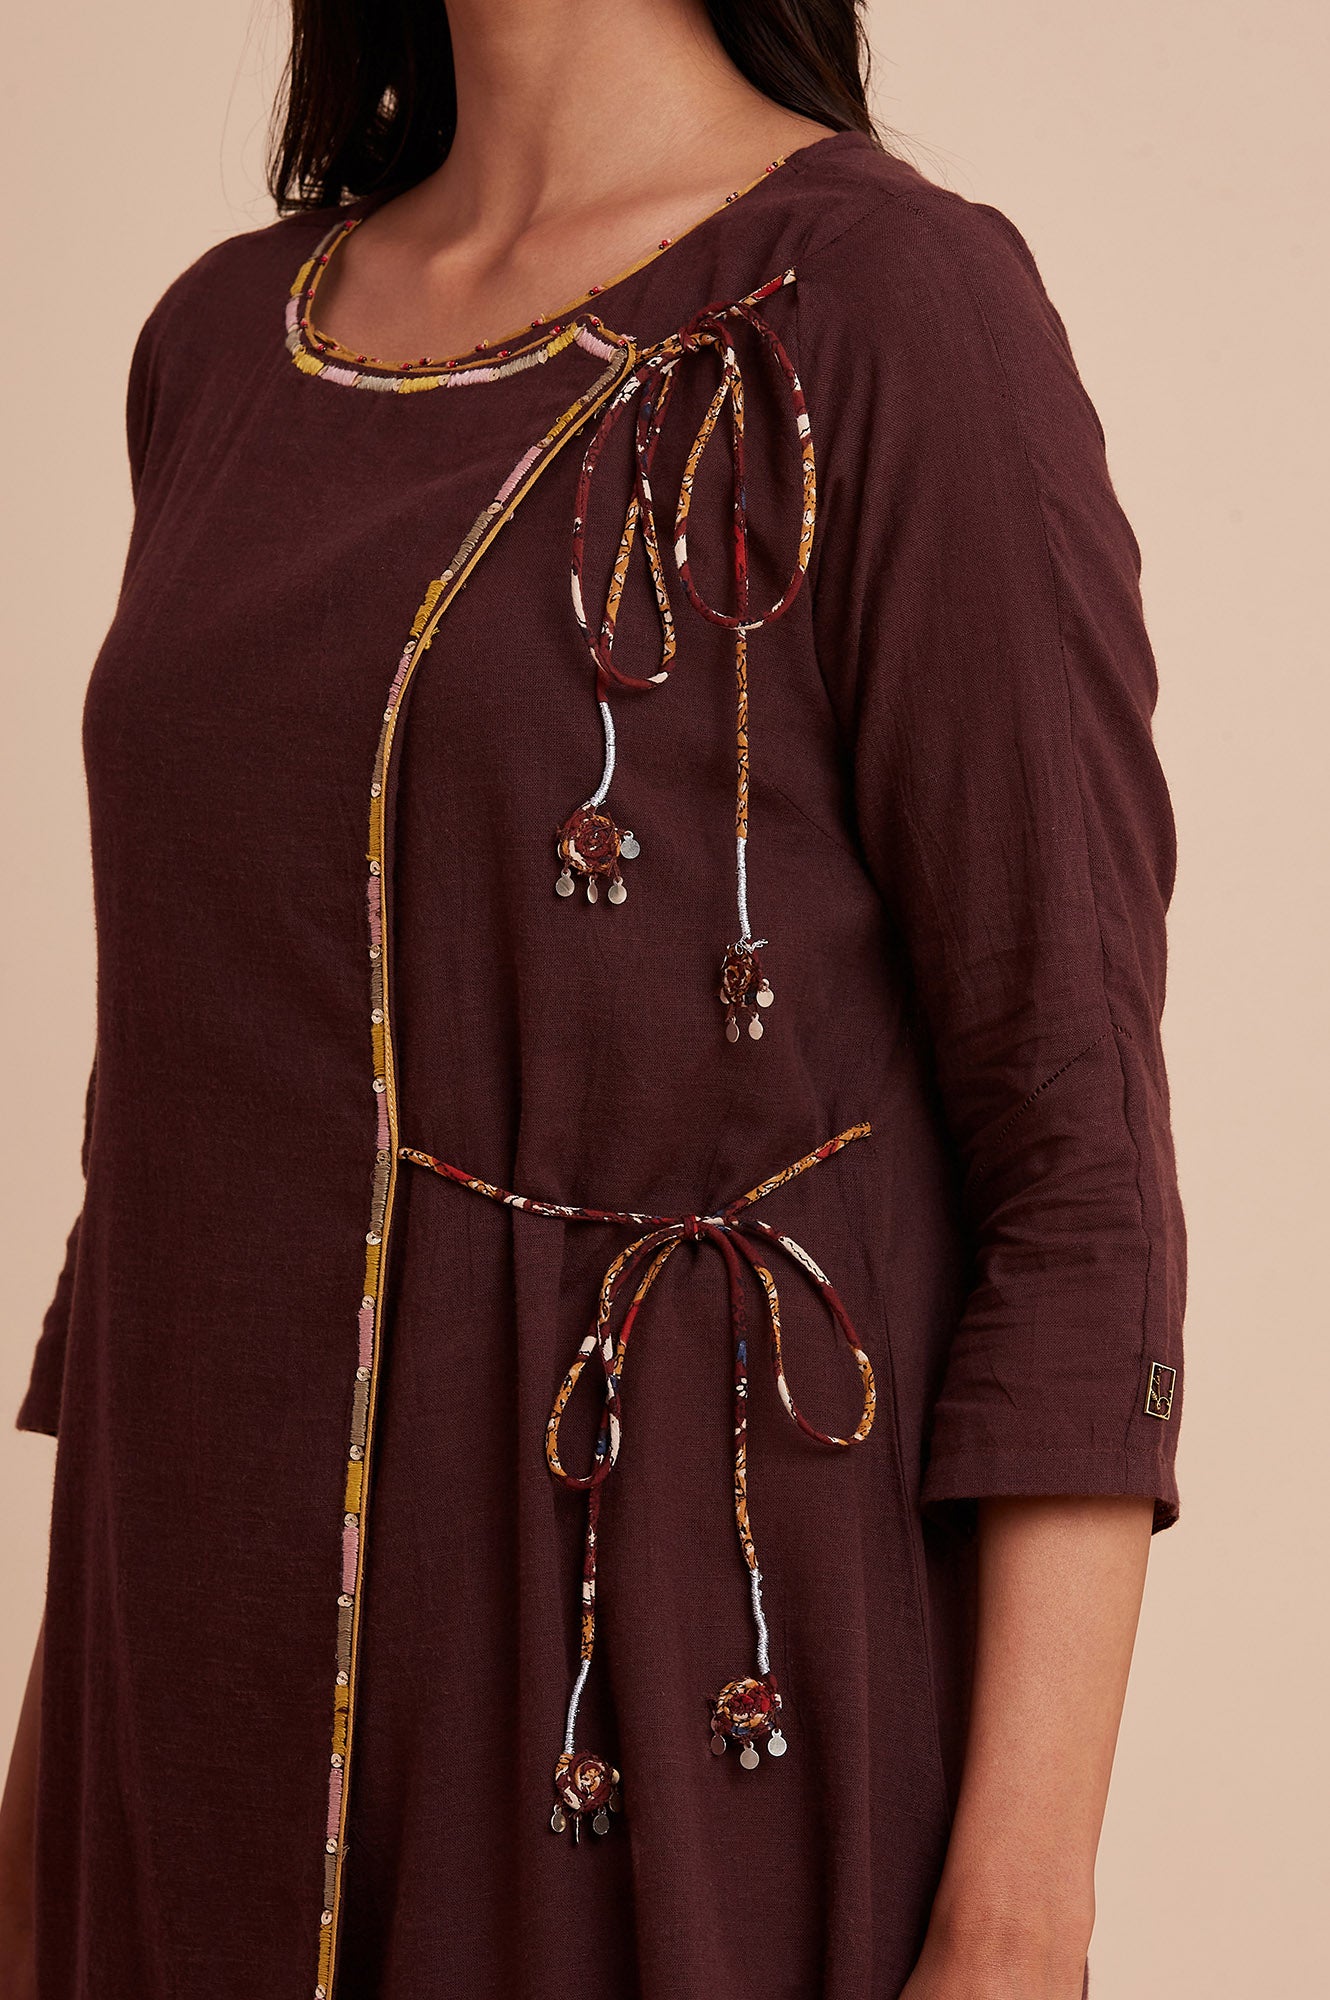 Brown Wrapped cotton kurta with tie up detail